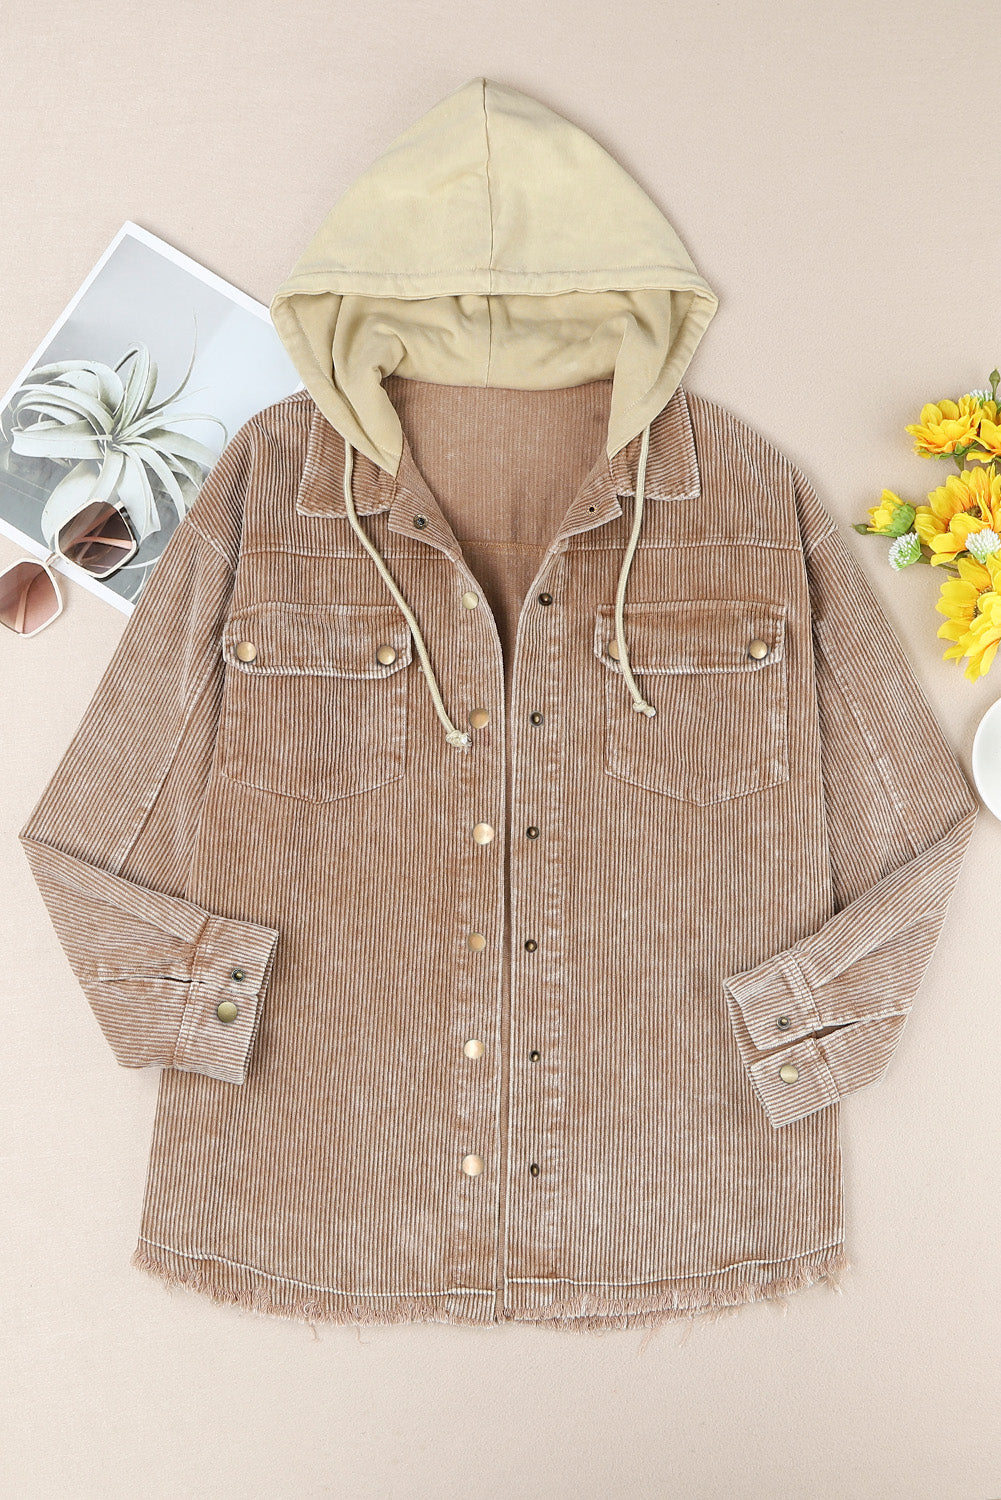 LC8512025-17-S, LC8512025-17-M, LC8512025-17-L, LC8512025-17-XL, LC8512025-17-2XL, Brown Corduroy Shacket Jacket Button Down Hooded Coat with Pockets